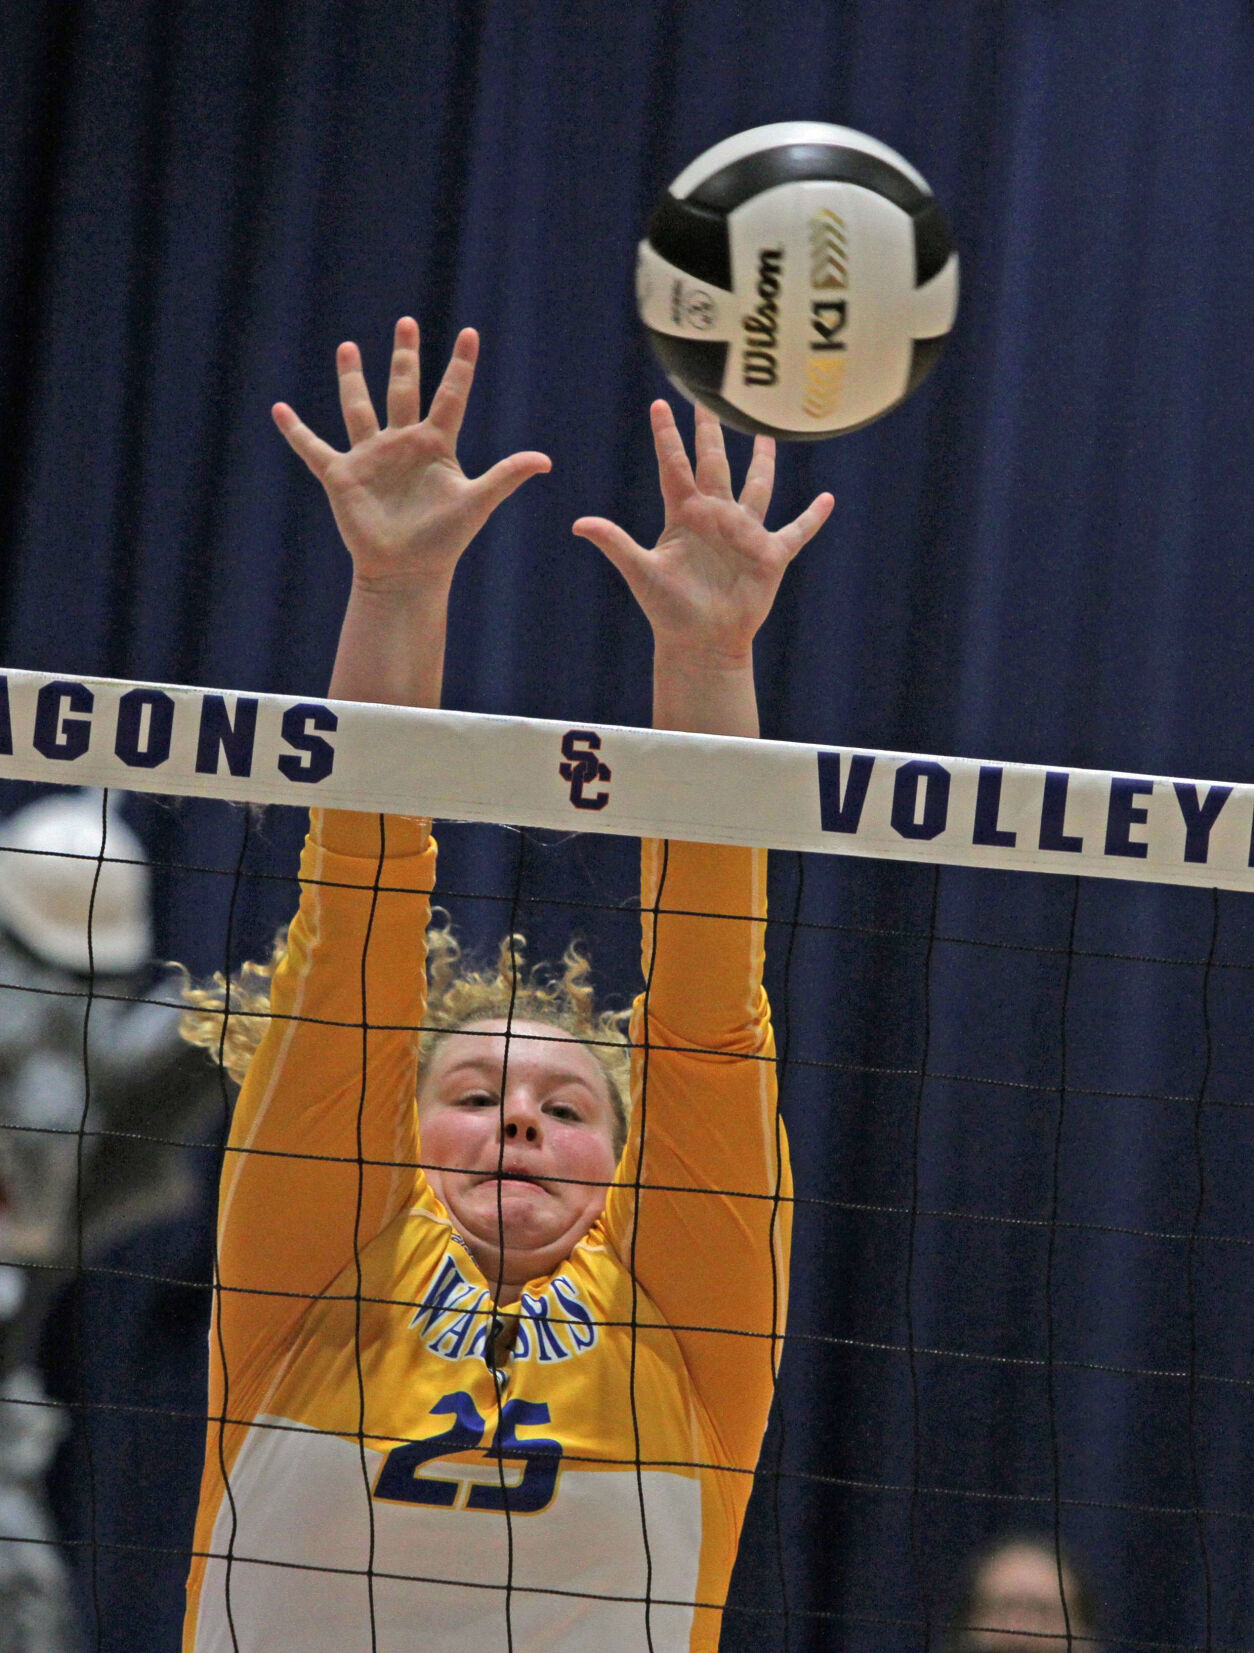 Christian Academy dominates New Washington in girls’ volleyball sweep